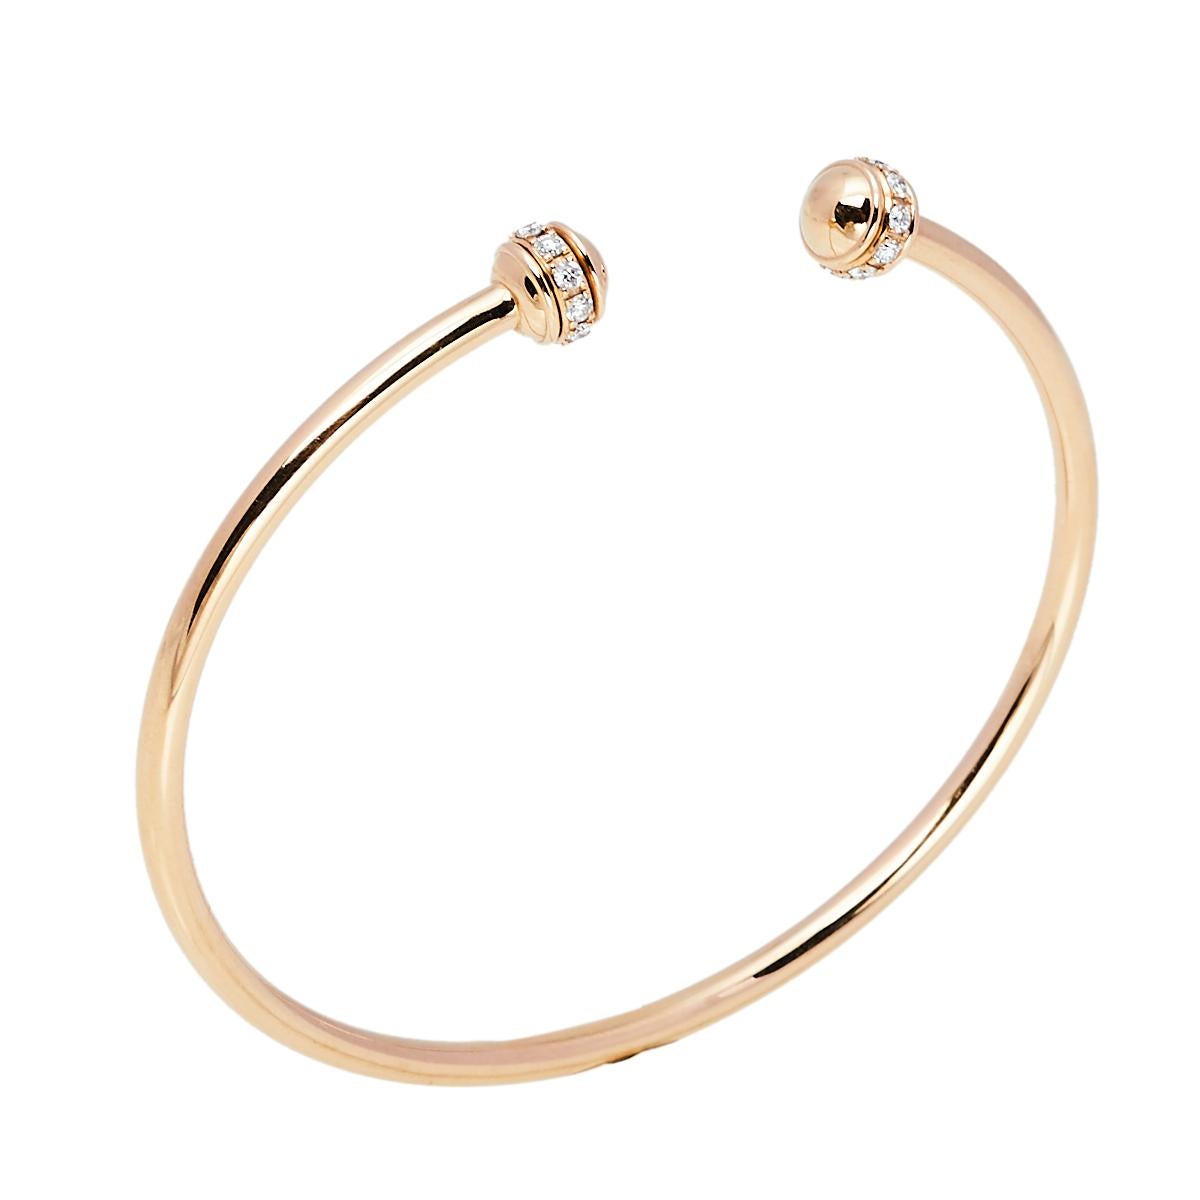 Show your love for fine artistry and luxury accessories with this stunning open cuff bracelet from Piaget that is made from 18k rose gold. One of the most popular collections from Piaget is Possession which is defined by rotating rings. The beauty